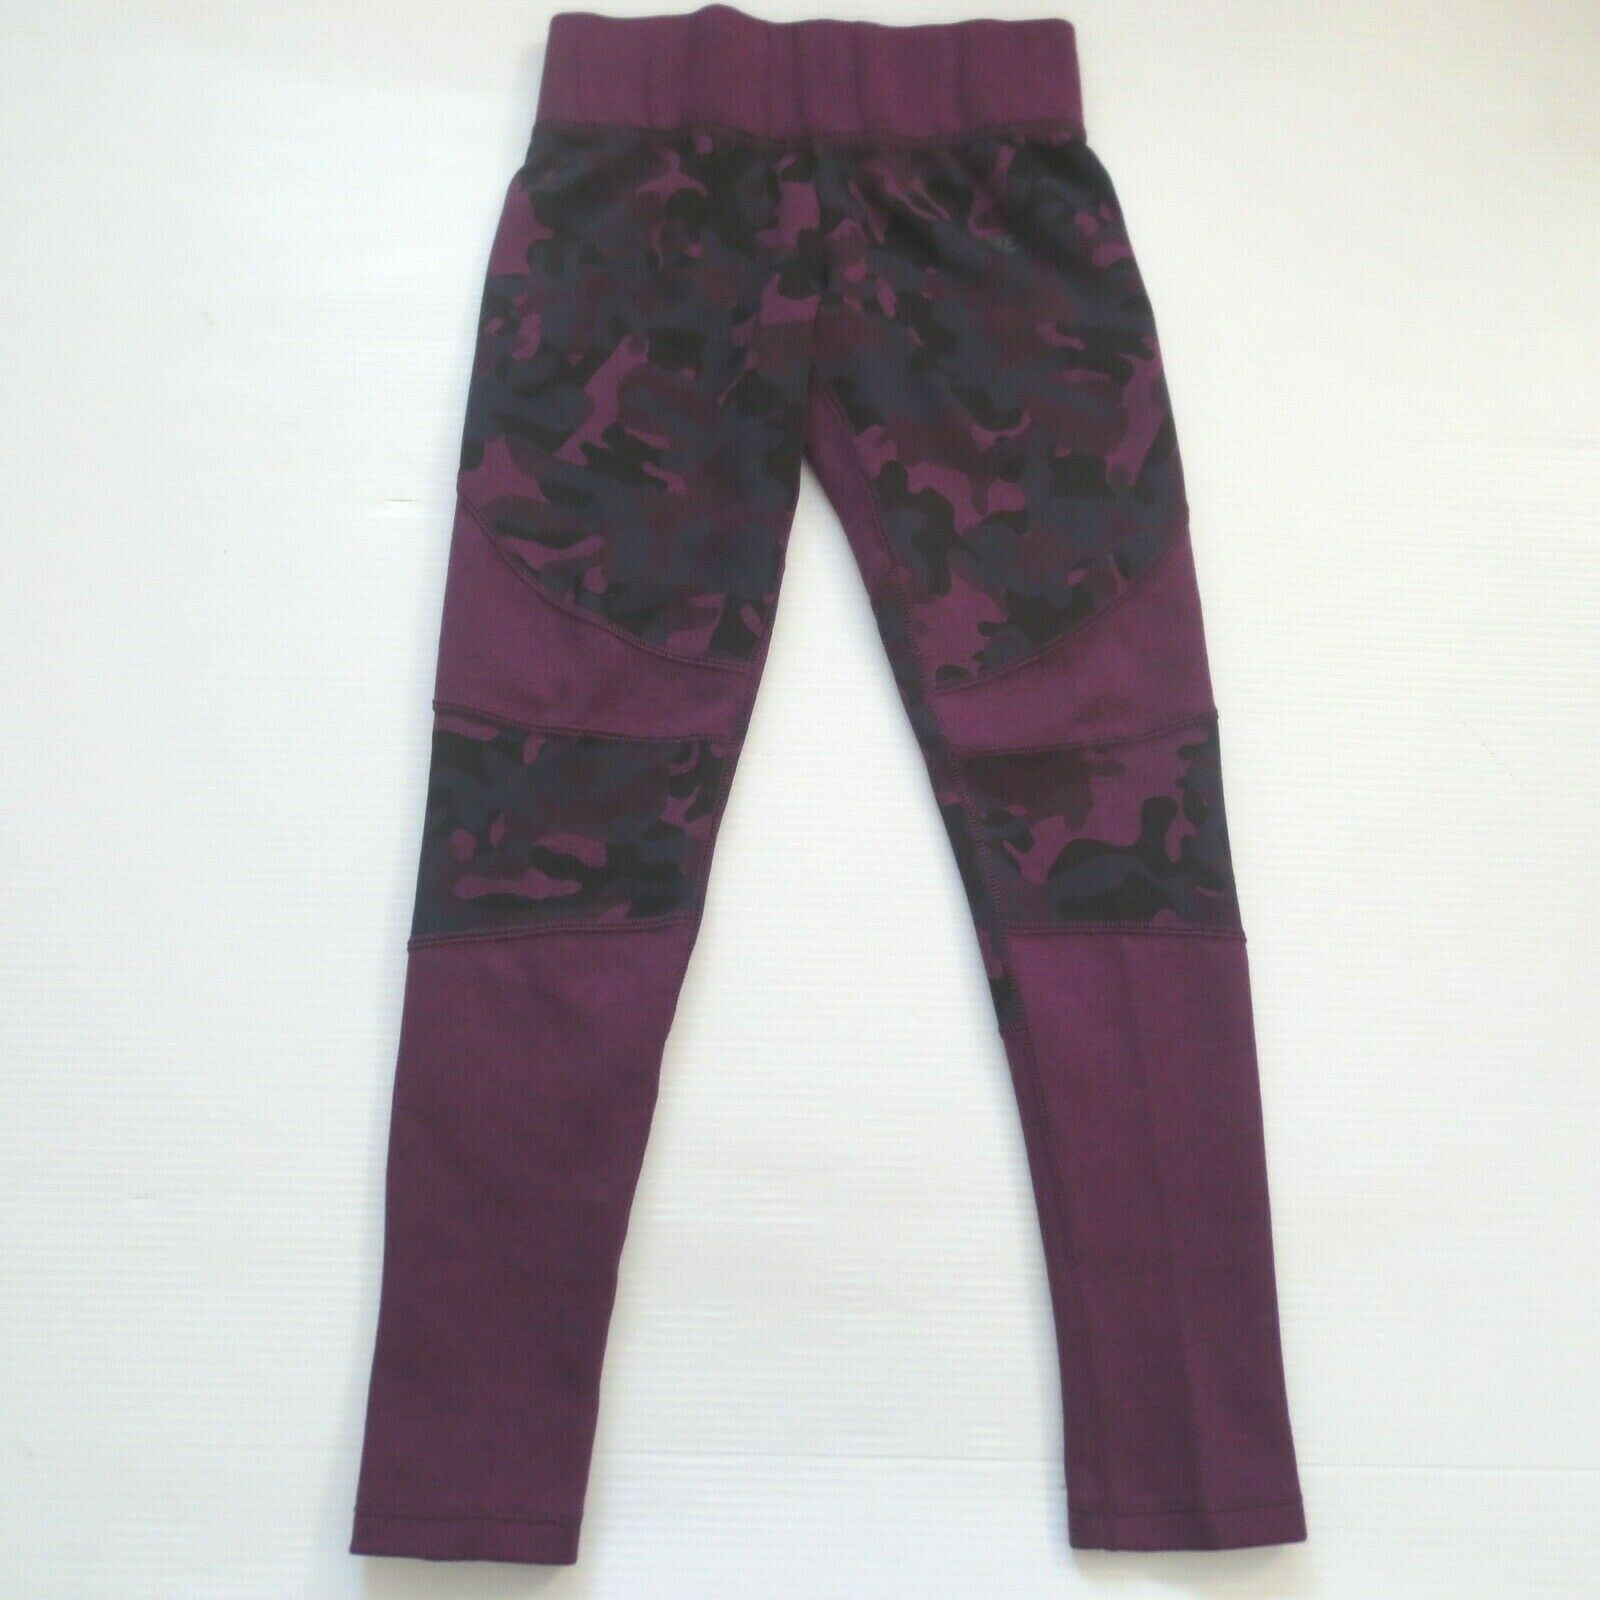 Primary image for Nike Girls Tech Fleece Printed Leggings 716804 - Red Camo 563 - L - NWT